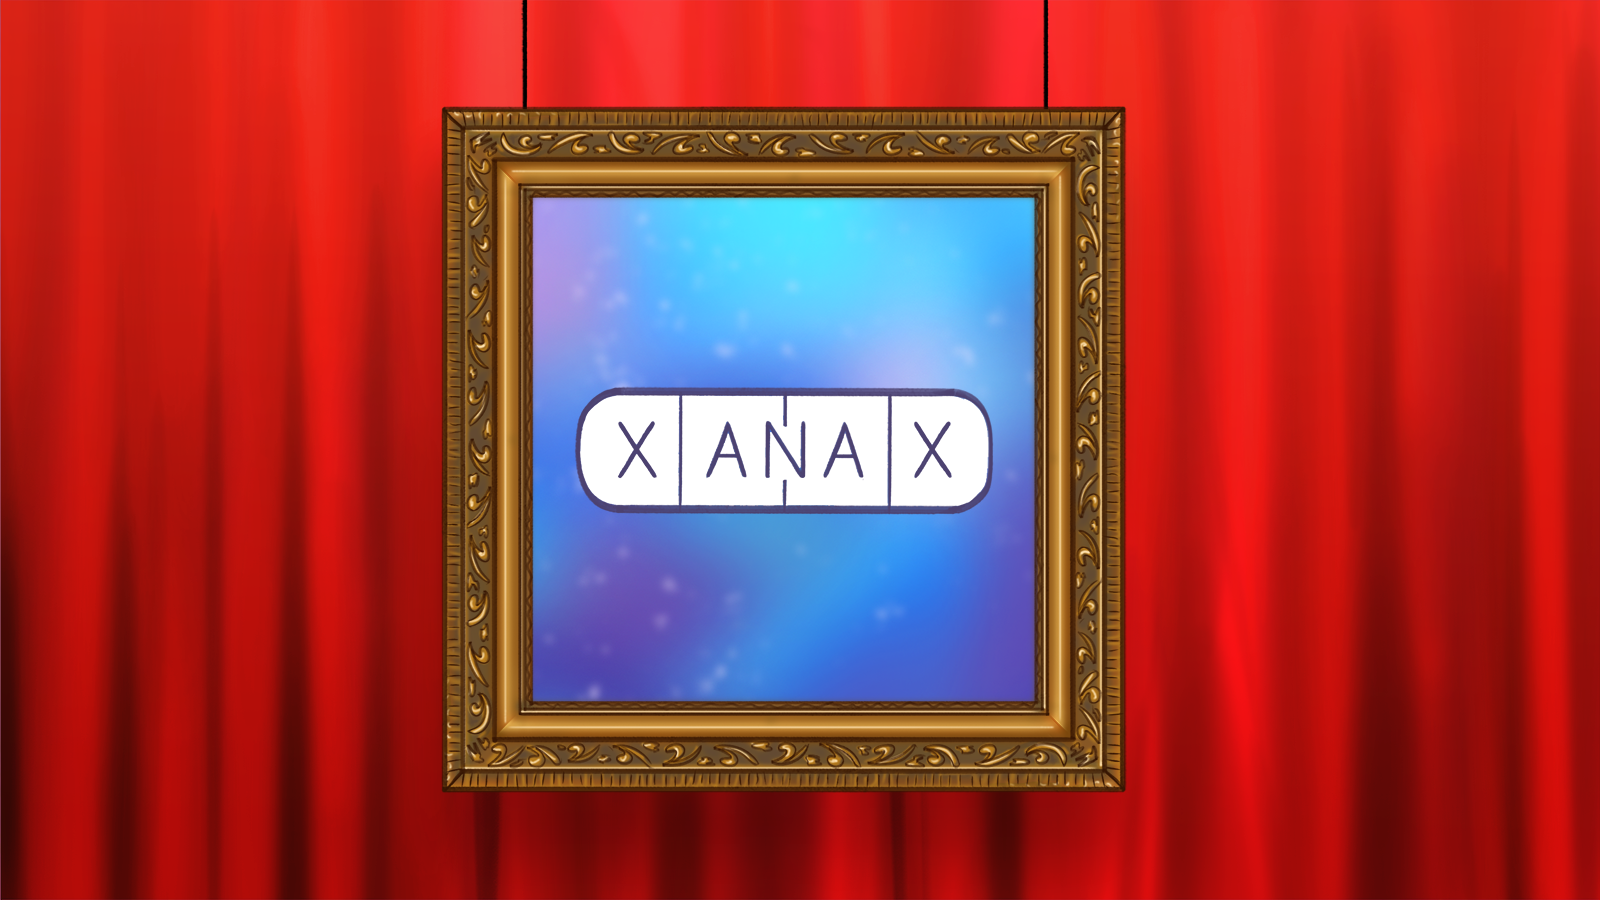 Real Xanax Pill - How to Identify Fake Xanax Bars (A Guide)